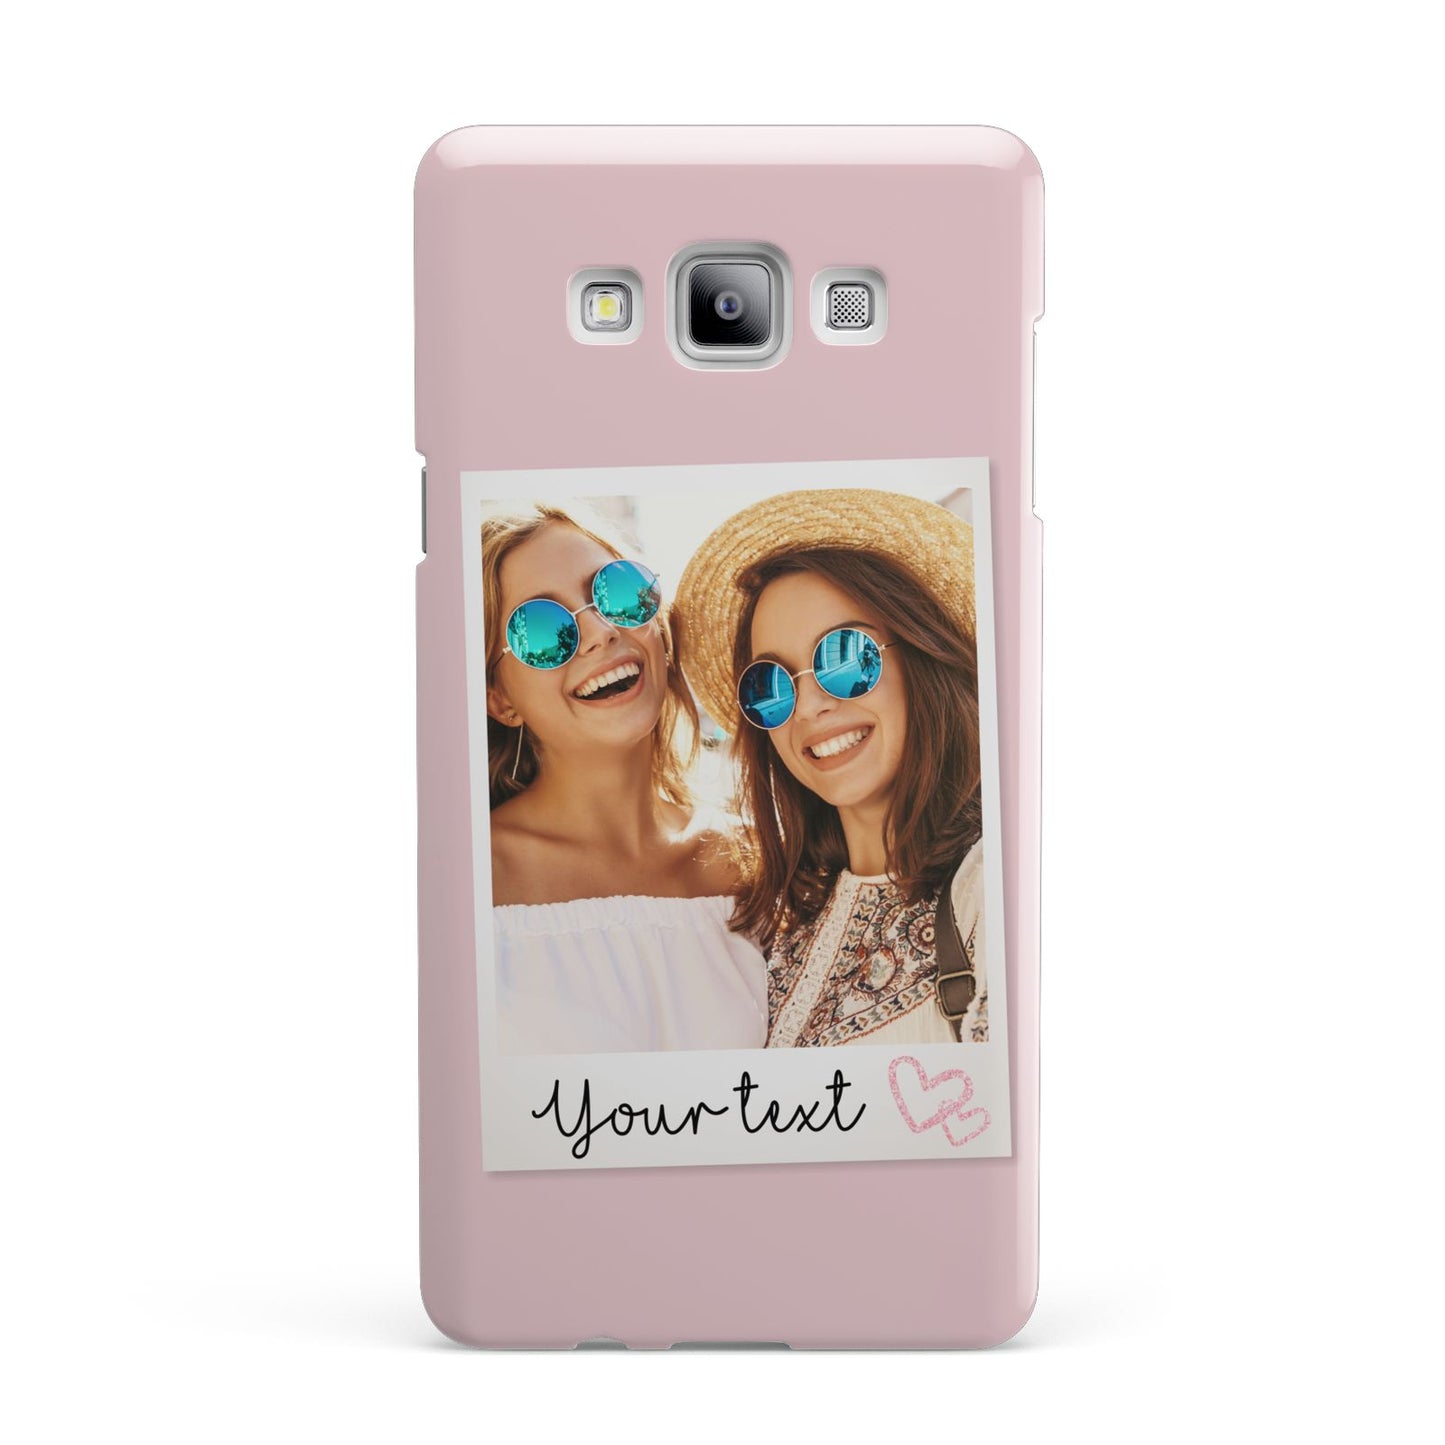 Personalised Best Friend Photo Samsung Galaxy A7 2015 Case